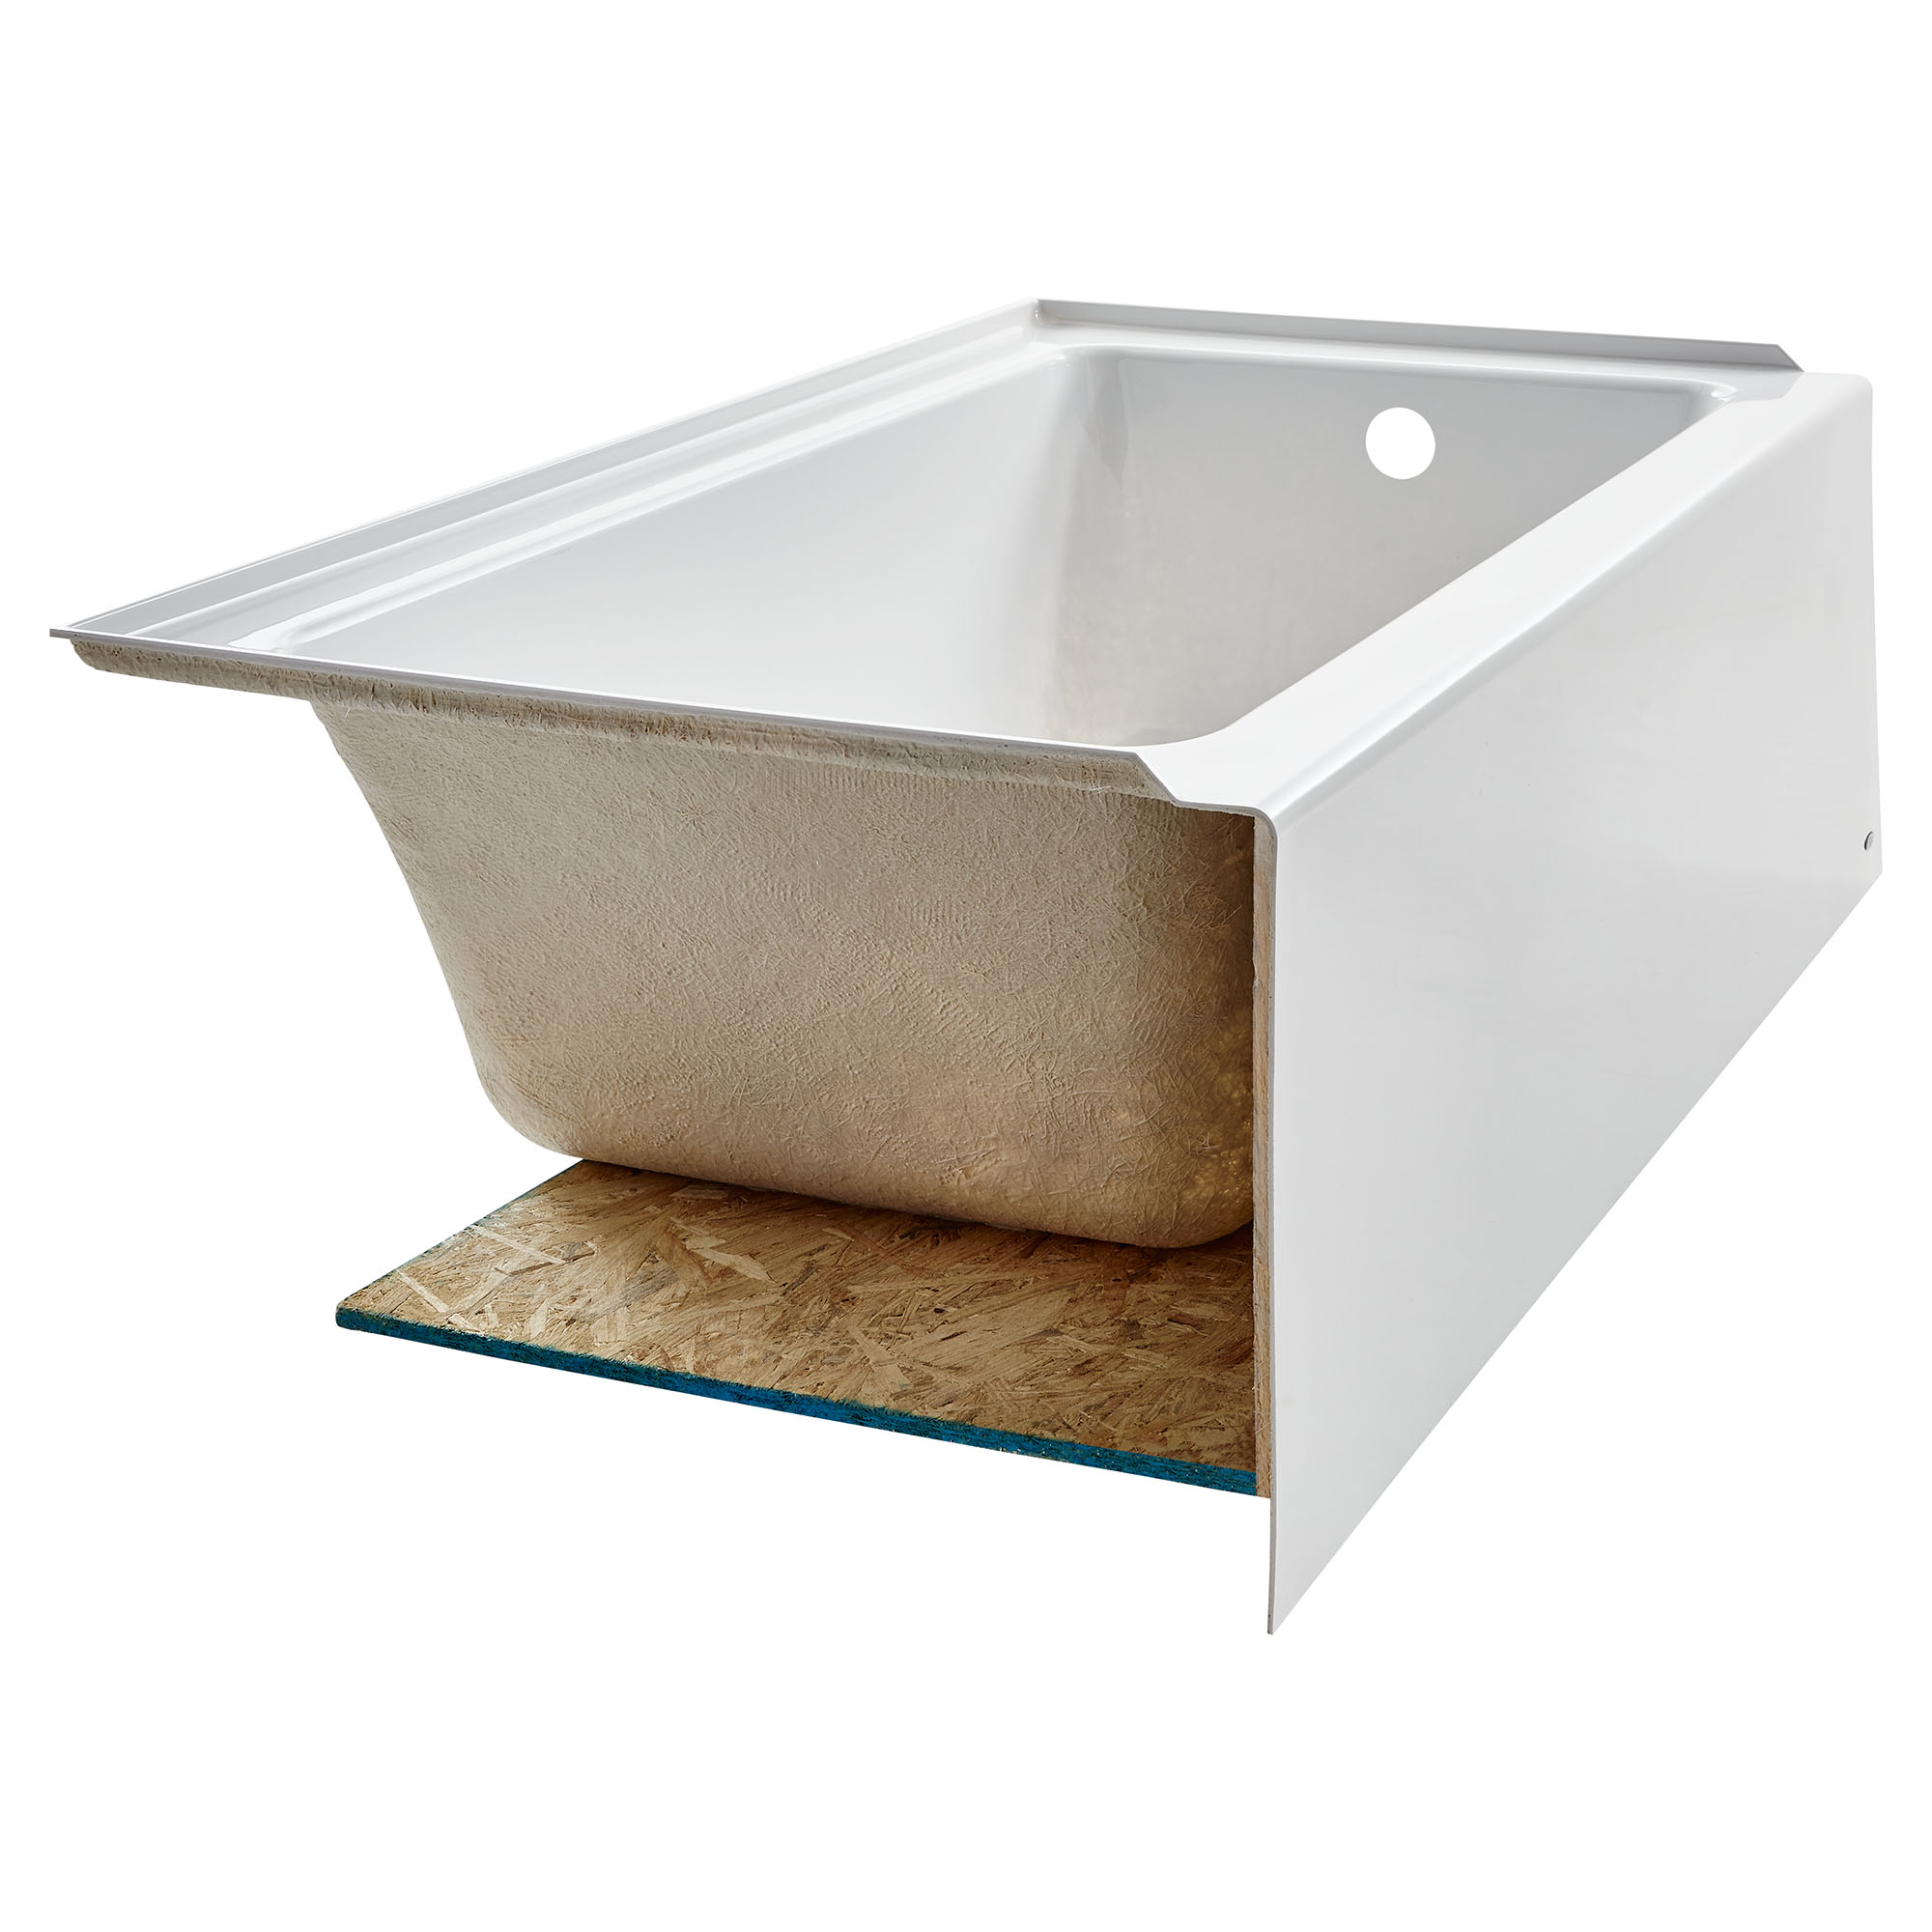 Studio® 60 x 32-Inch Integral Apron Bathtub With Right-Hand Outlet